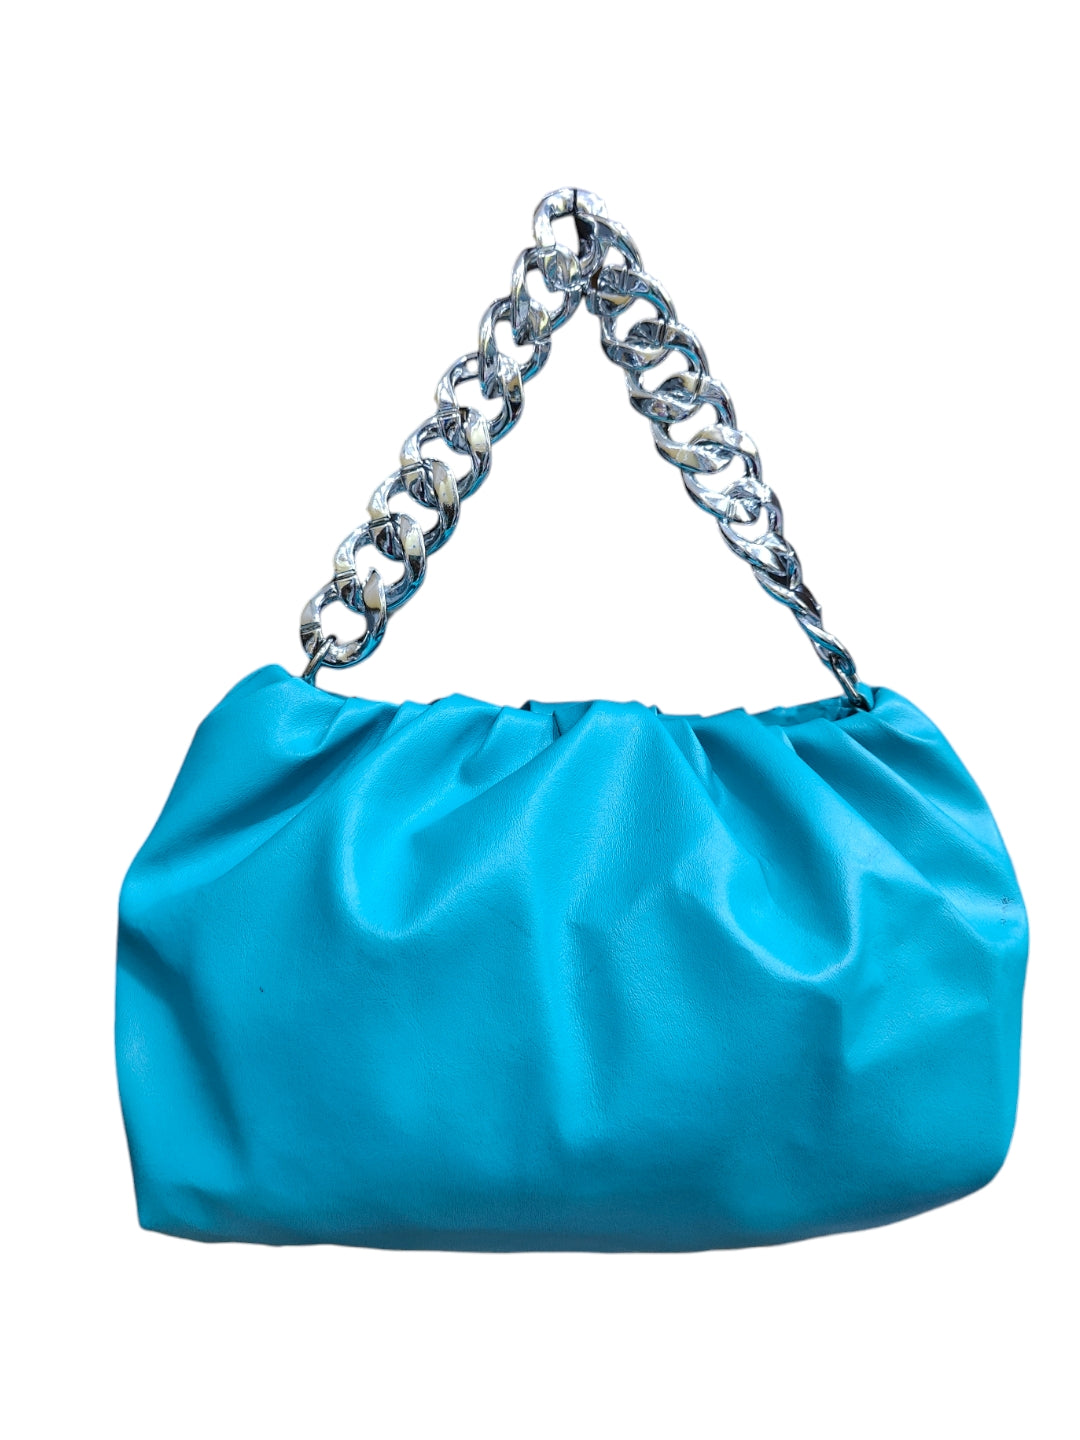 Blue sling bag for casual day out